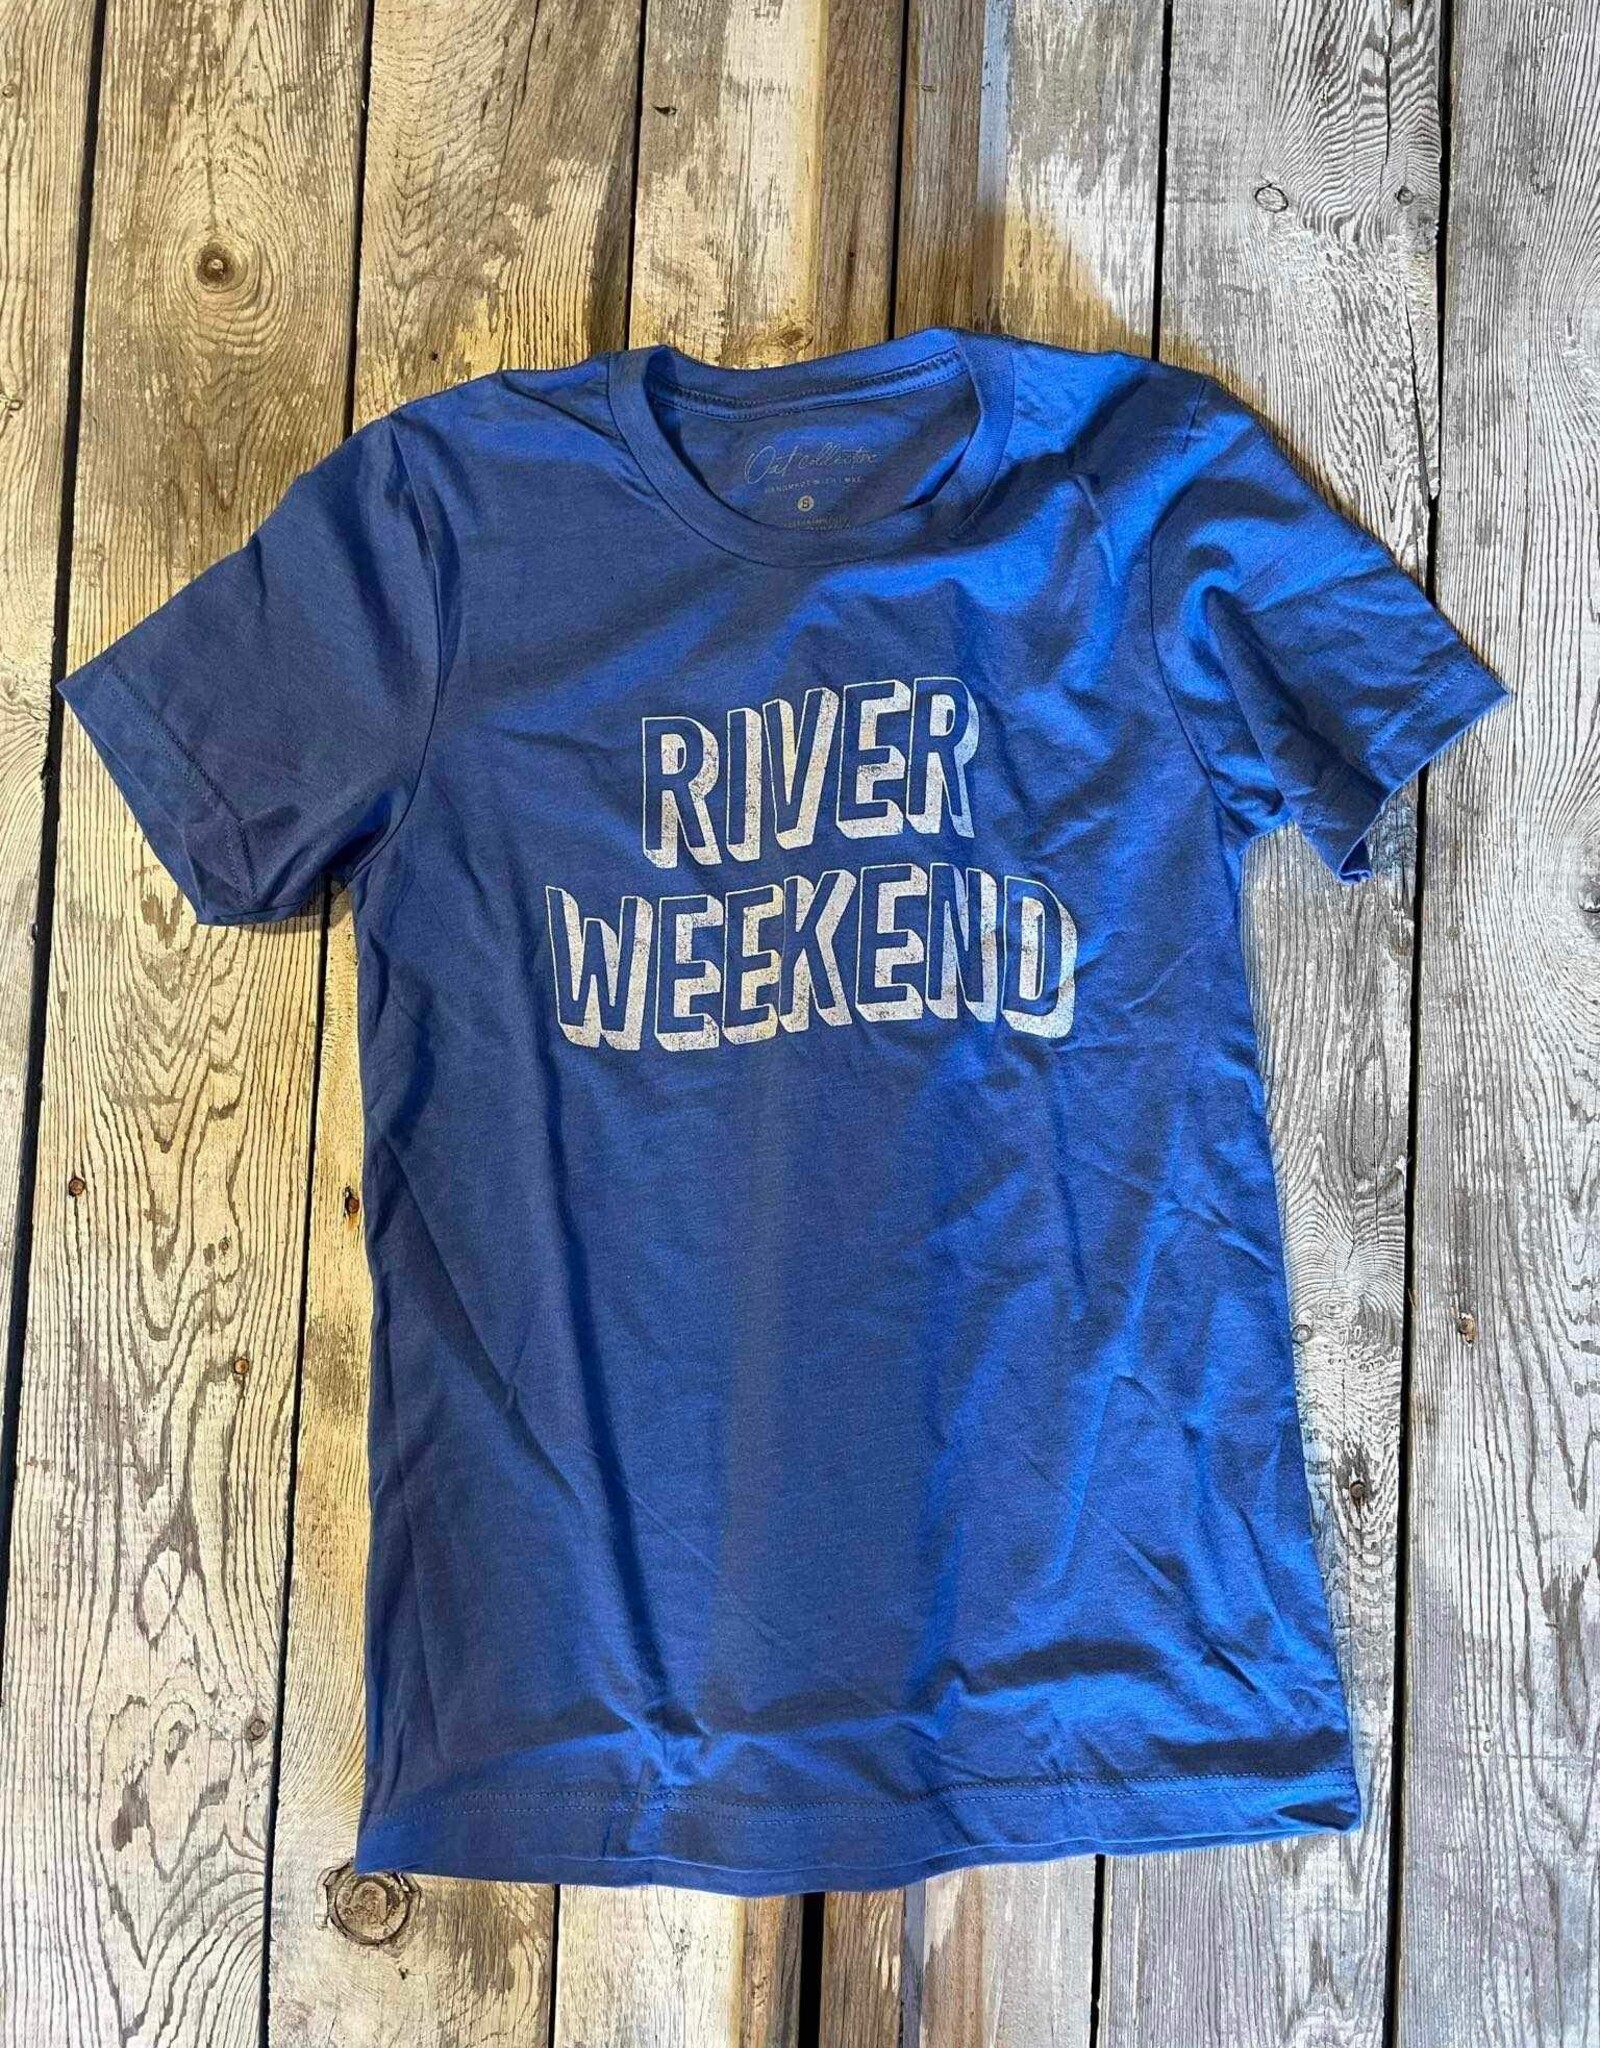 Oat Collective River Weekend Graphic T-Shirt - Heather Royal